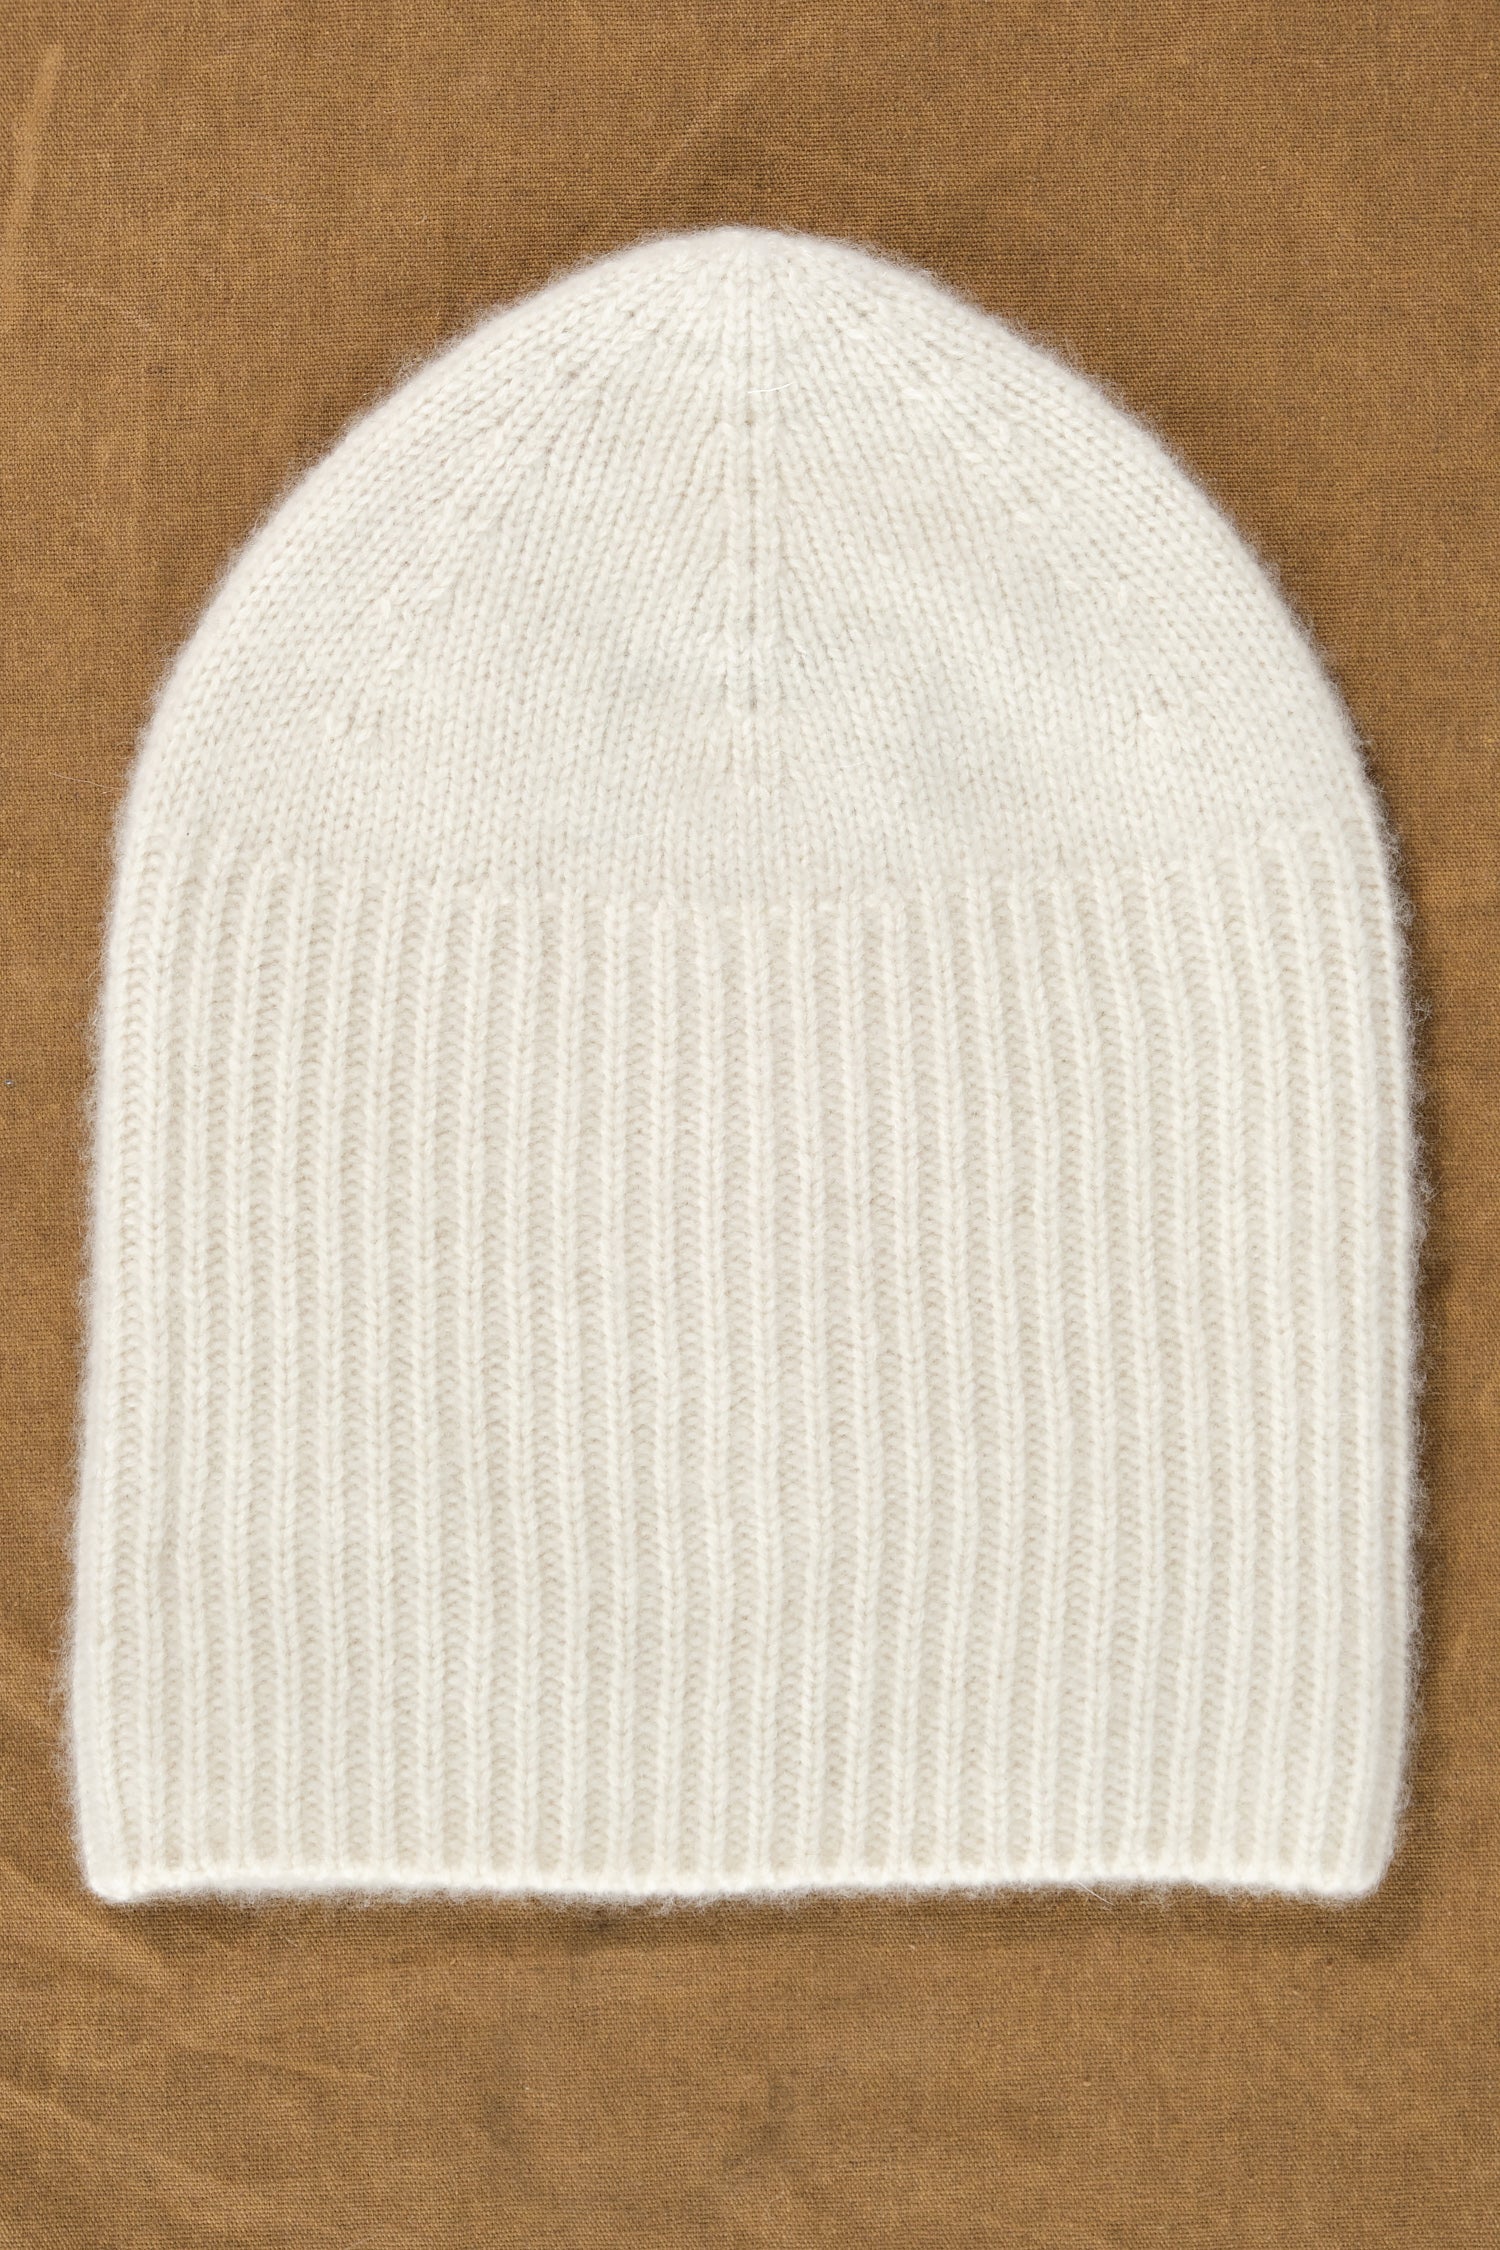 Unfolded Cashmere Knit Cap in White